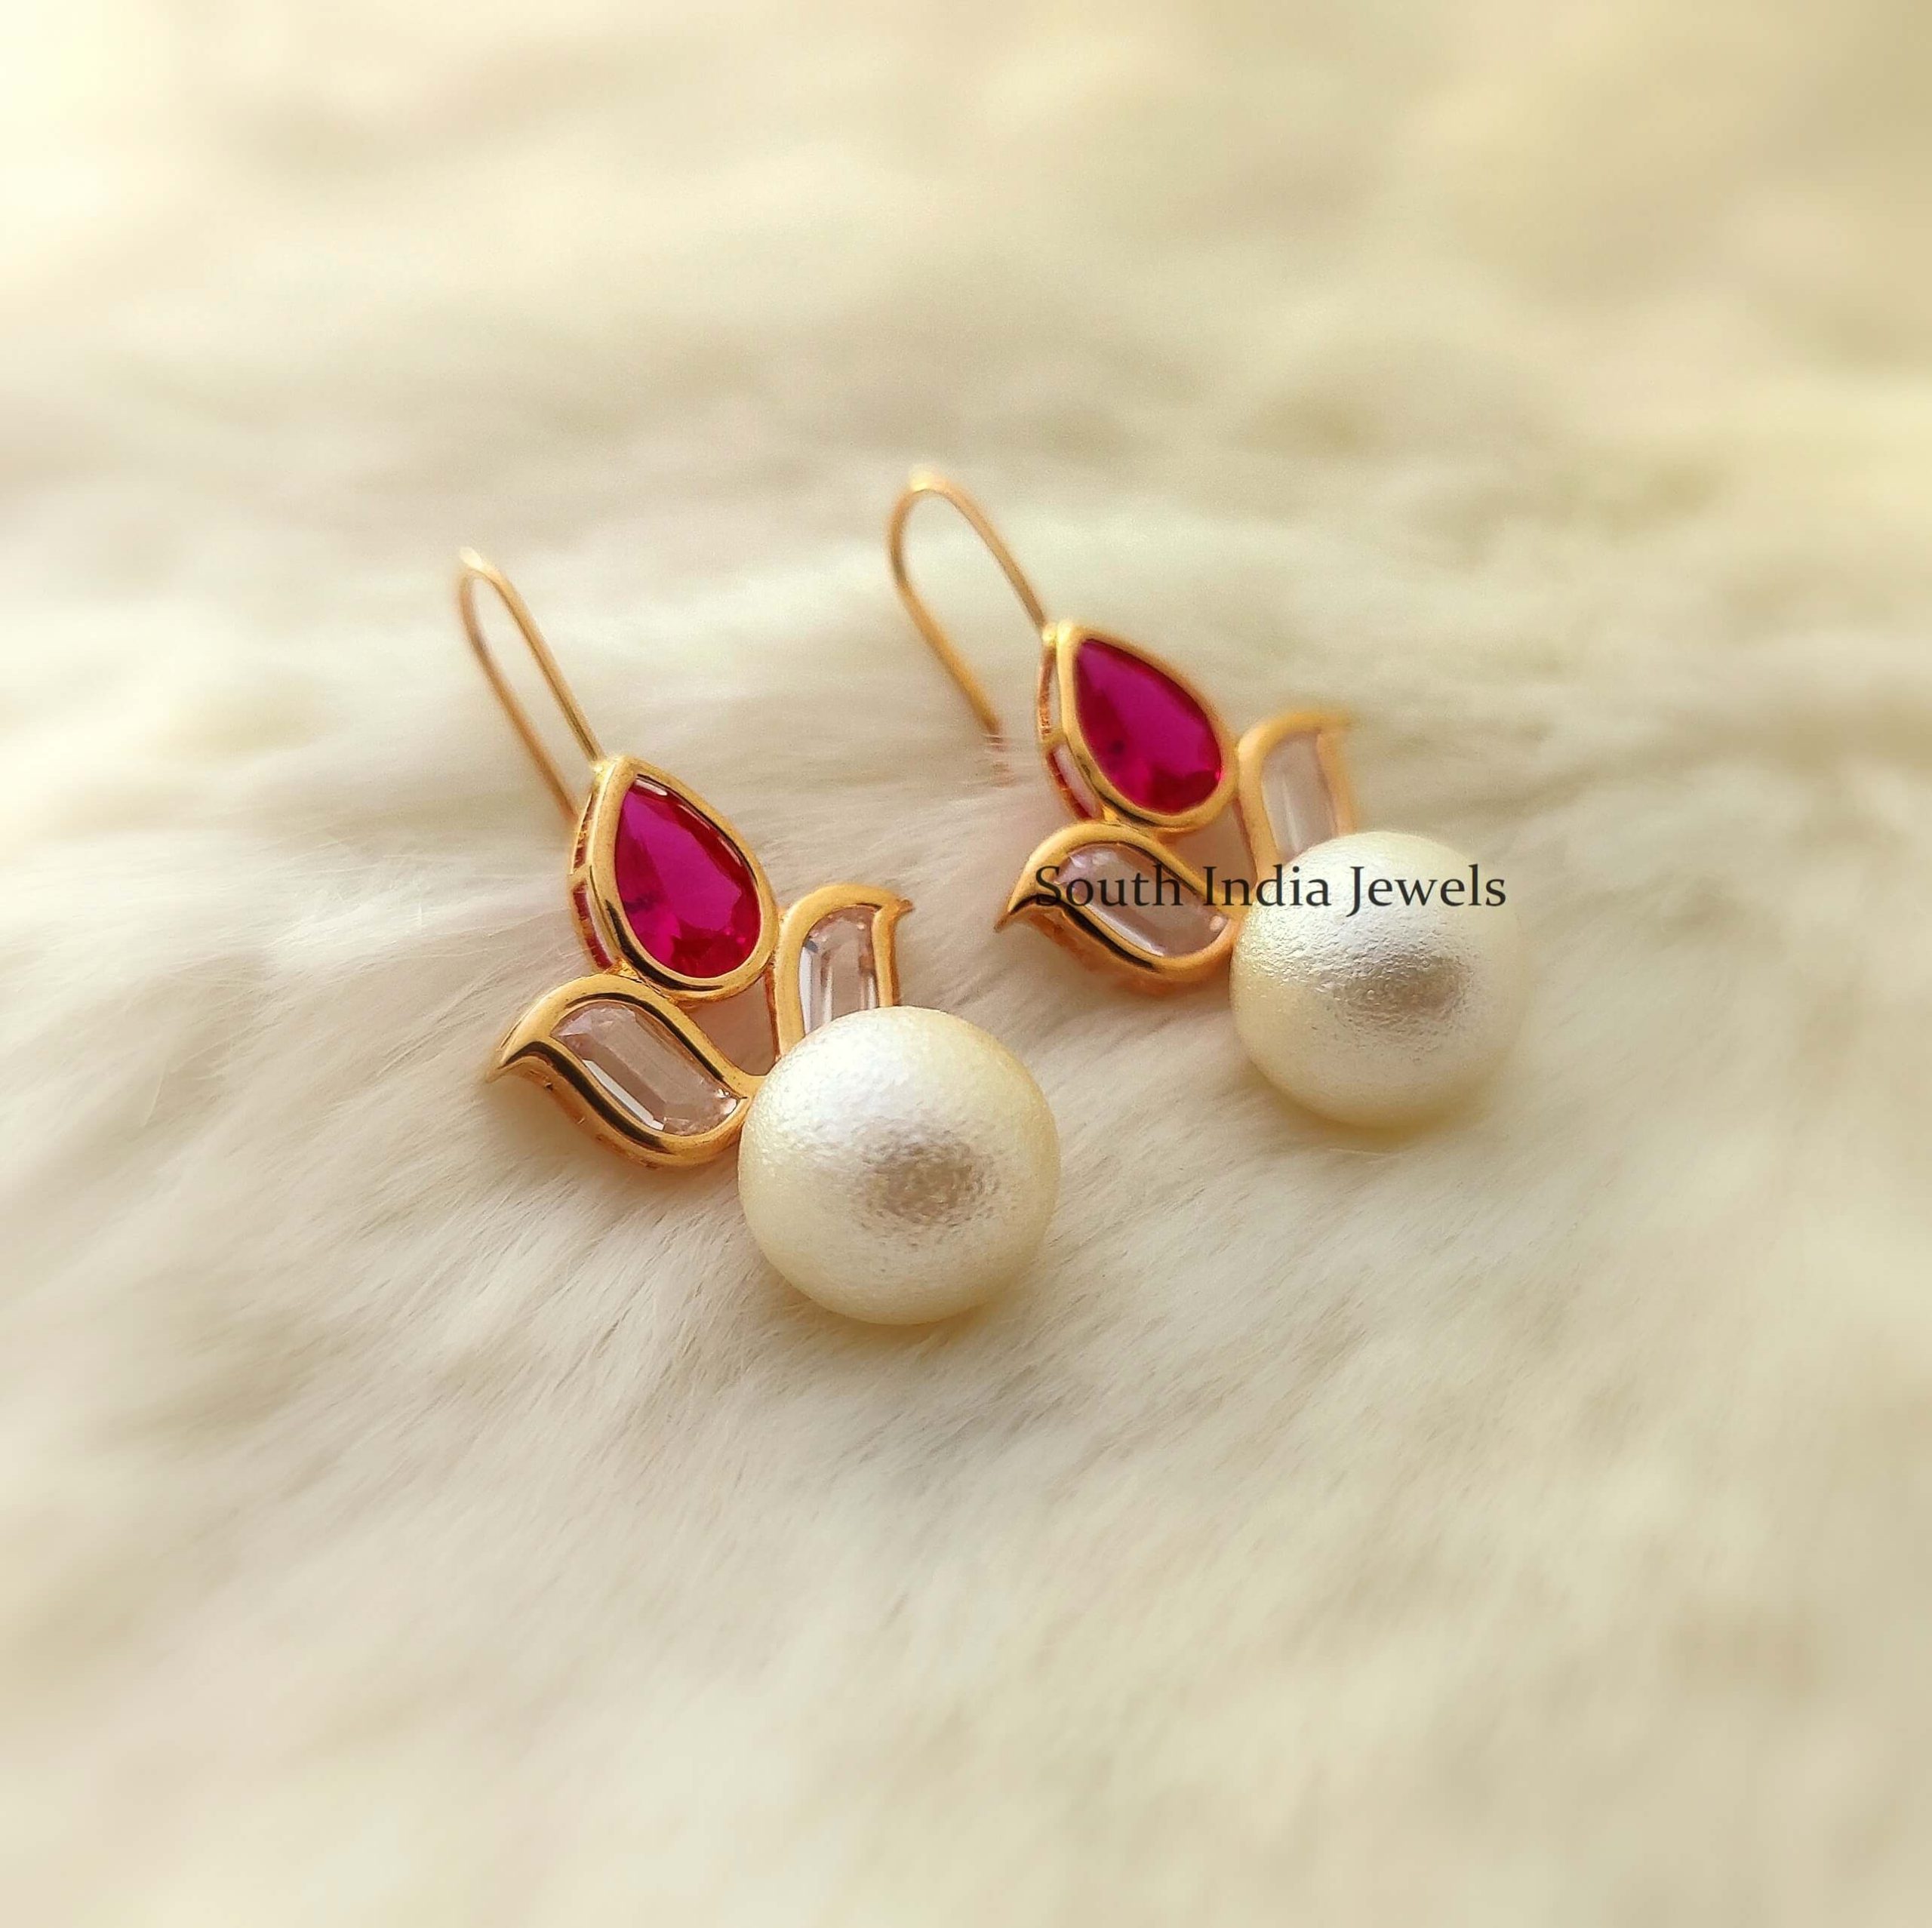 Details more than 75 gold and pearl drop earrings - esthdonghoadian